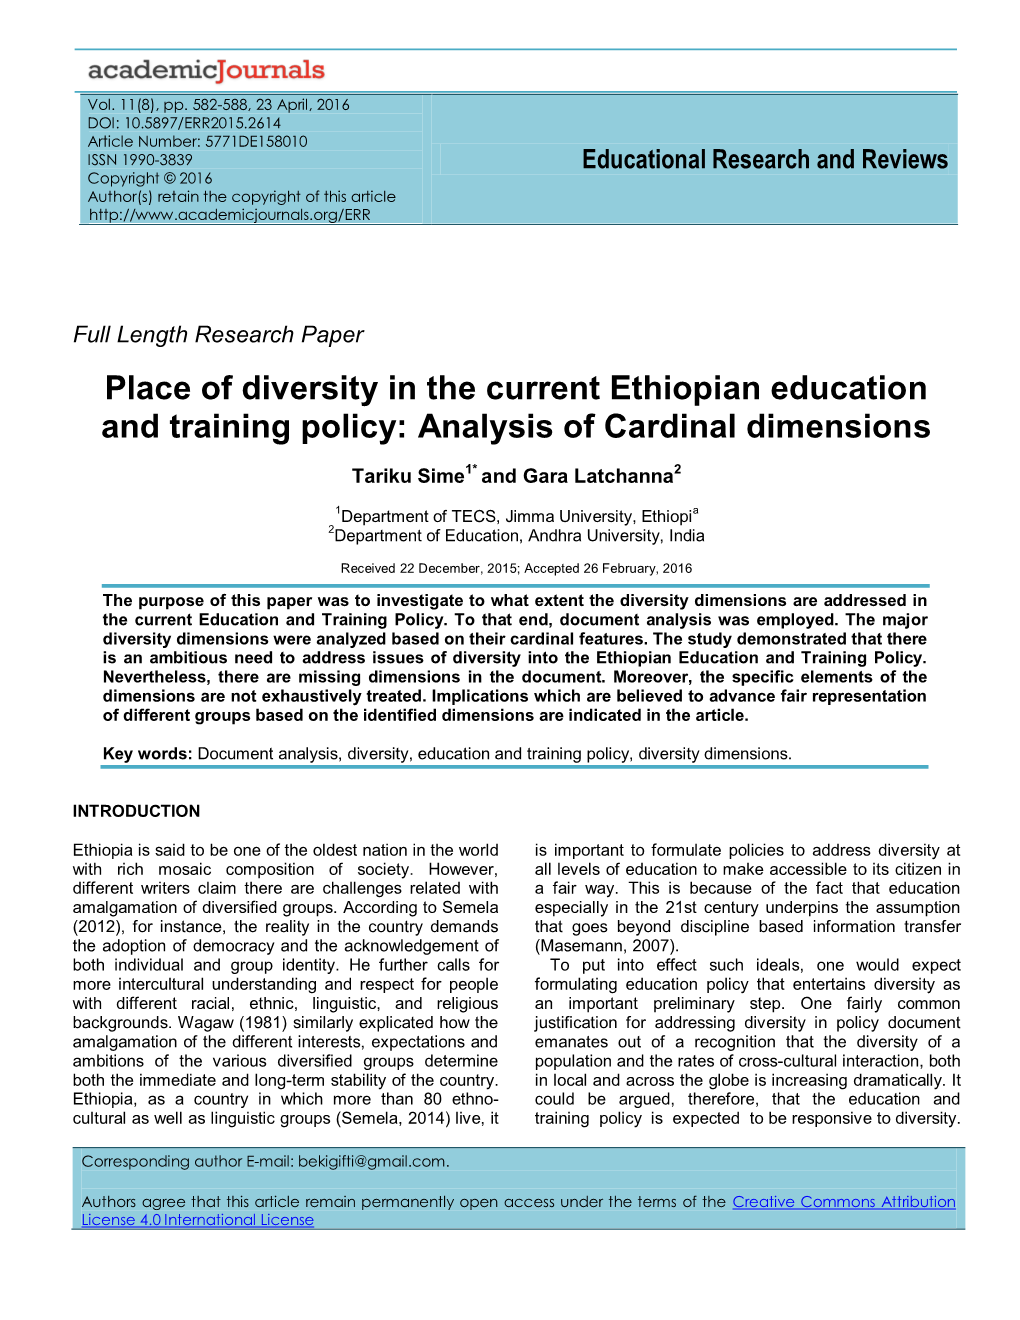 Place of Diversity in the Current Ethiopian Education and Training Policy: Analysis of Cardinal Dimensions